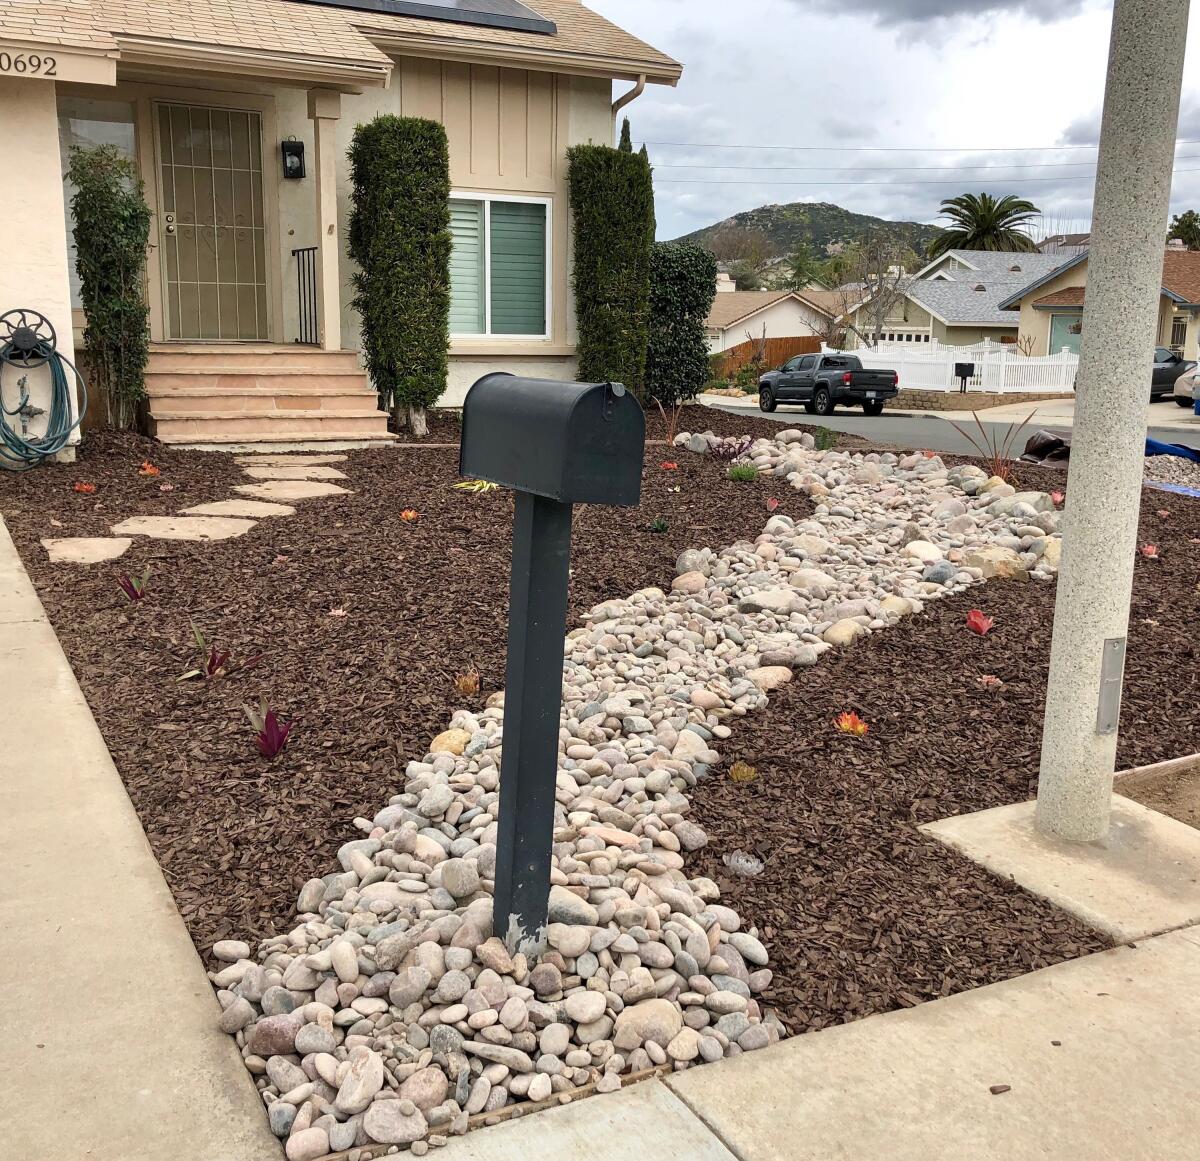 The Perrells tamed their front yard in one long weekend, removing the grass and starting with a winding riverbed of rocks.